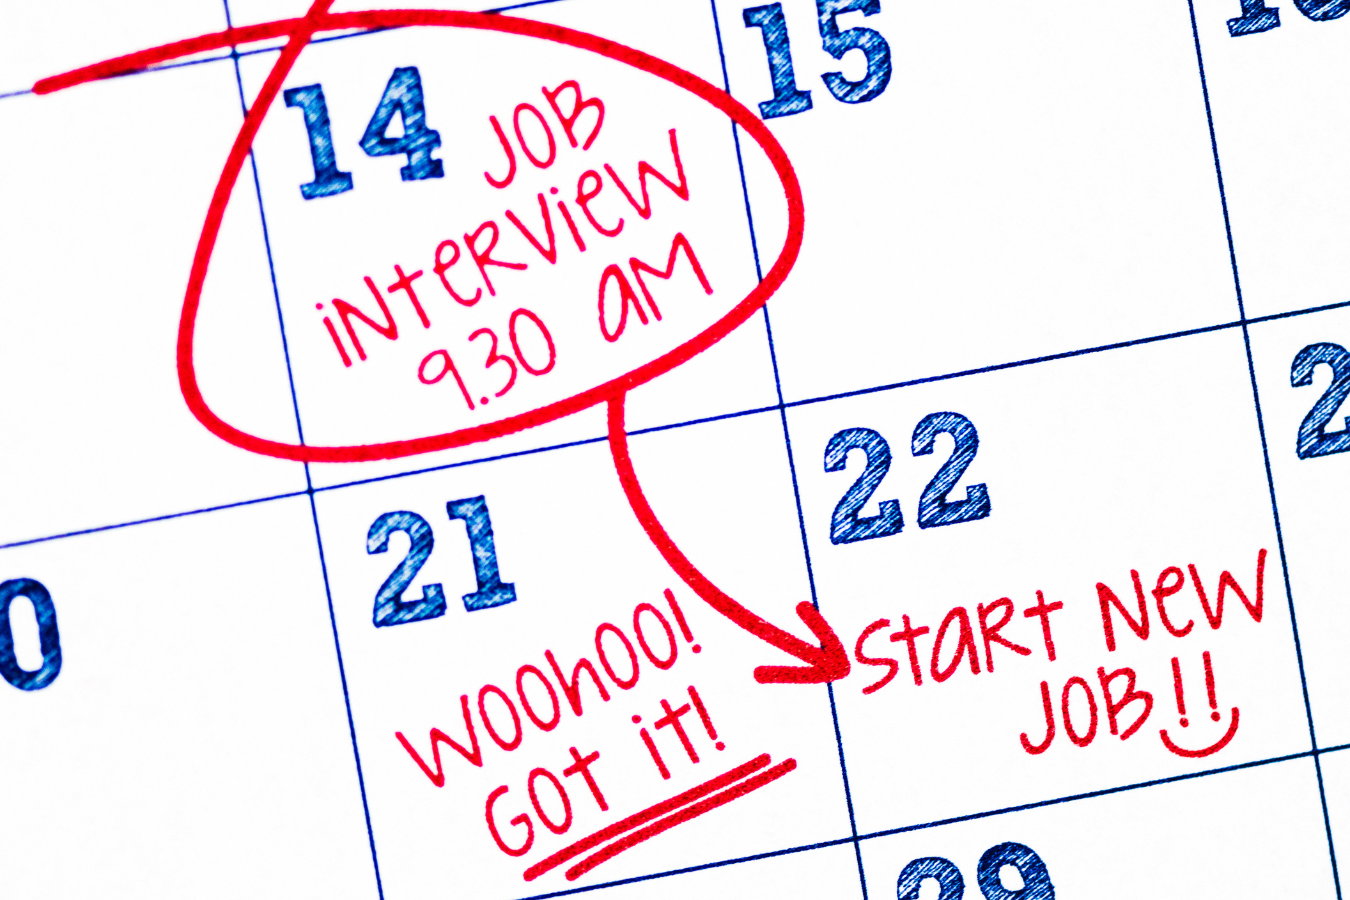 calendar showing a job interview scheduled: these tips will help with your next marketing job interview